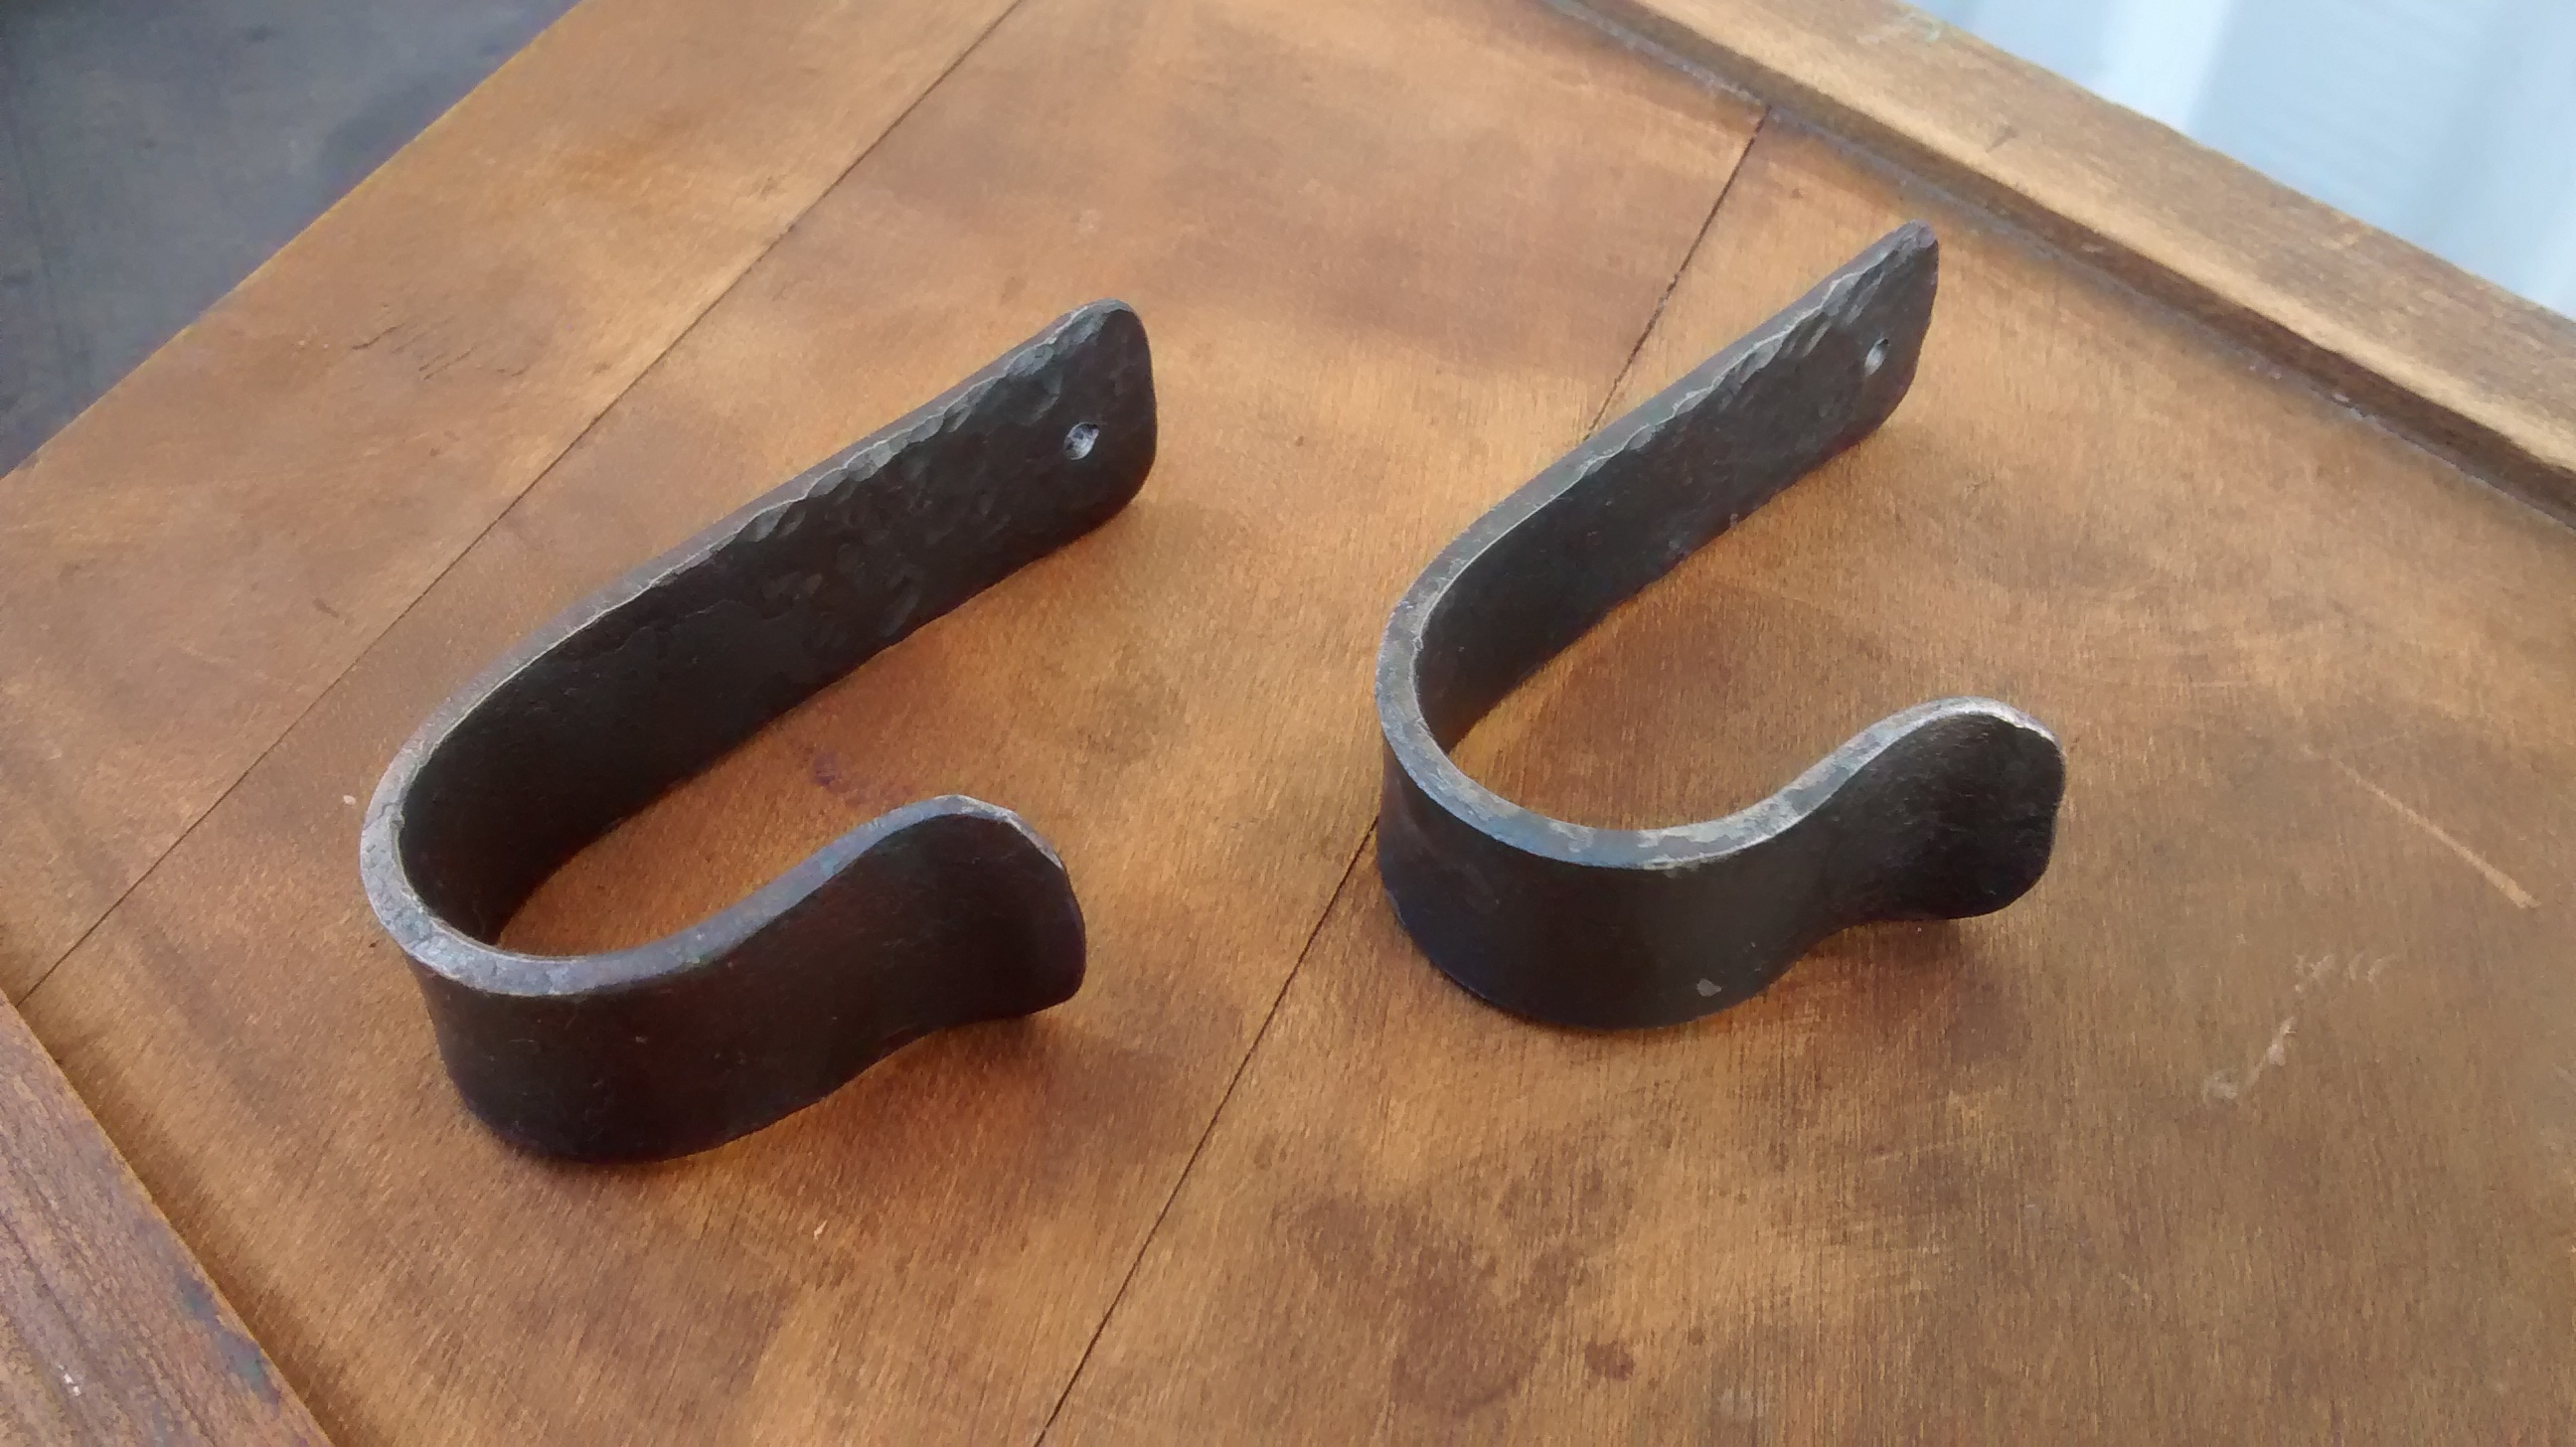 Boat Paddle Hooks - Rifle Hooks - Gun Hooks - Brown County Forge 2 - Terran  Marks the Blacksmith - Brown County Forge